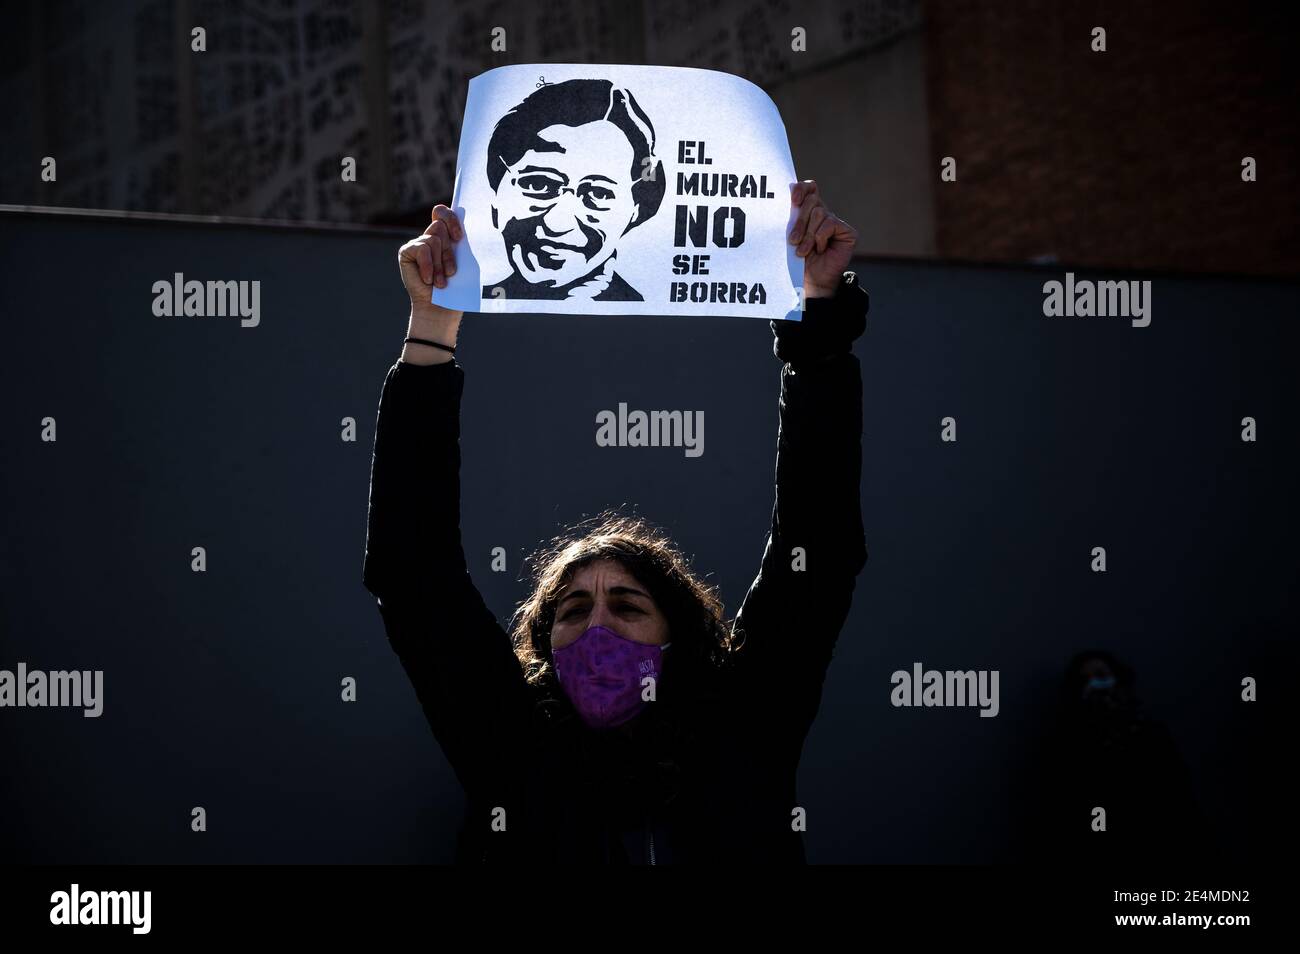 A woman holds a placard with the picture of Rosa Parks and the words 'the mural should not be erased', during a protest against the removal proposed by far-right party VOX of a feminist mural named 'Union makes force'. In the mural appear the faces of 15 women who are part of history for their fight in favor of equality: Angela Davis, Frida Kahlo, Nina Simone, Rigoberta Menchu, Lucia Sanchez Saornil, Rosa Arauzo, Valentina Tereshkova, Chimamanda Ngozi, Emma Goldman, Kanno Sugato, Liudmila Pavlichenko, Billy Jean King, Gata Cattana, Rosa Parks, and Comandanta Ramona. Stock Photo